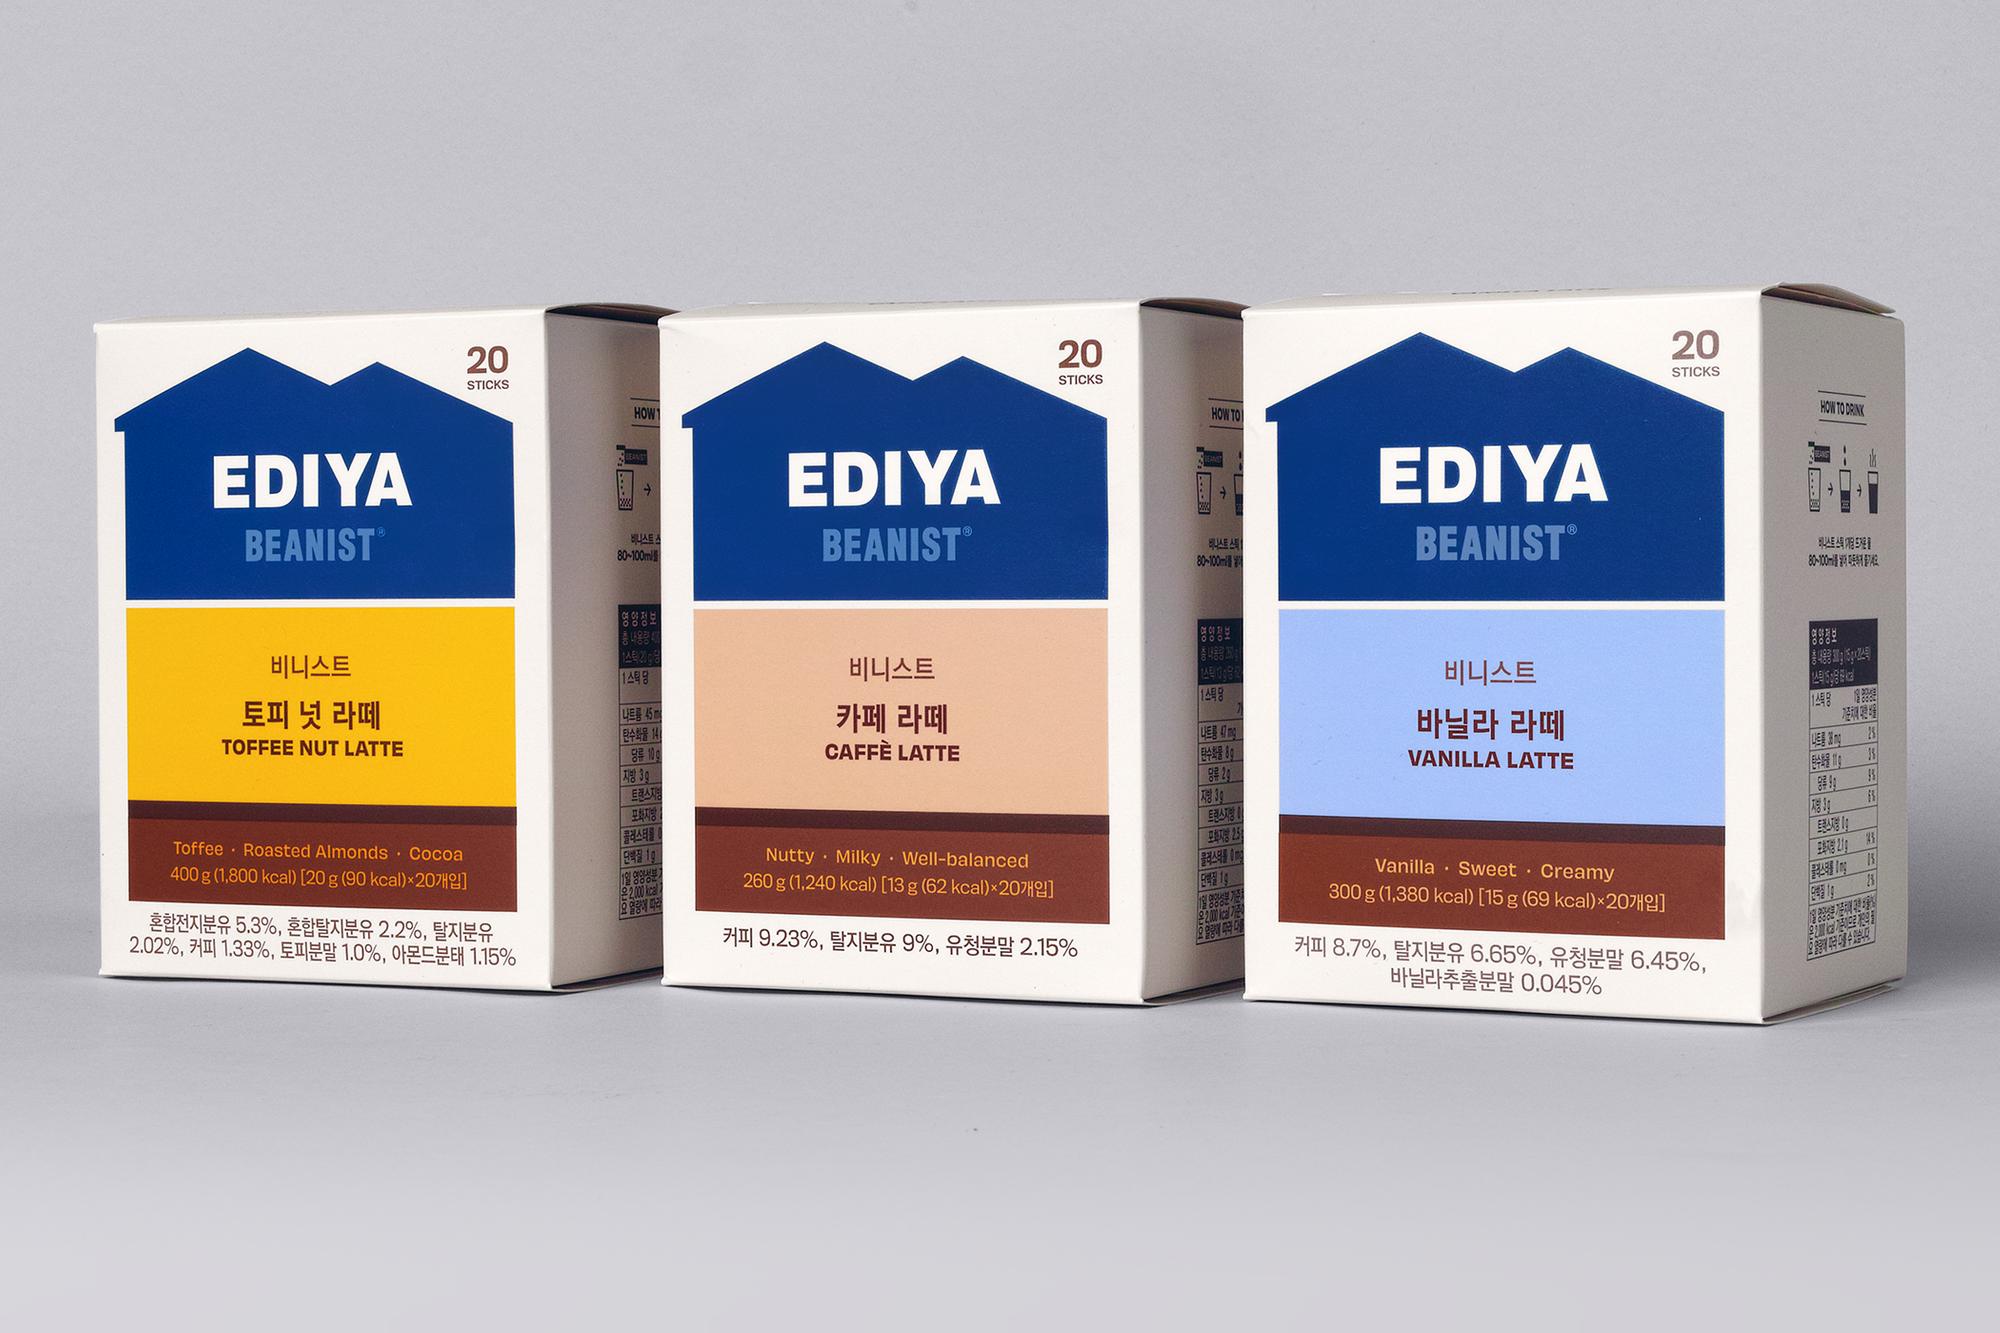 Visual identity and packaging programme by Studio fnt for South Korean coffee brand Ediya Beanist